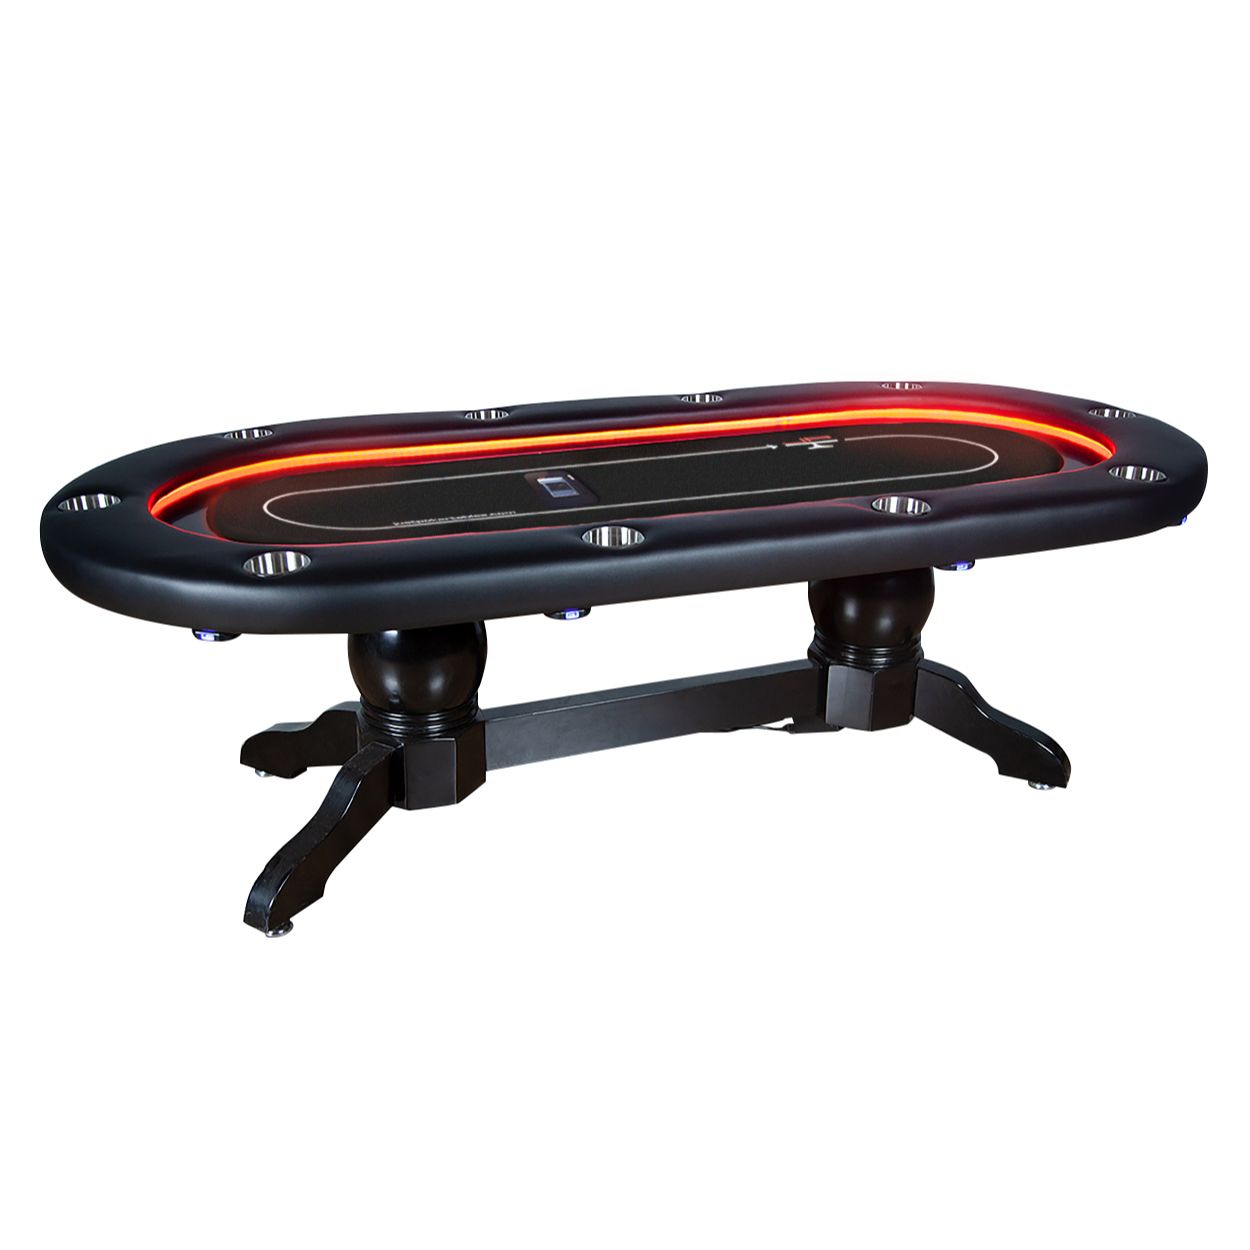 LED Oval Poker Table w/ Built-in Card Shuffler for 10 Person - Just Poker Tables